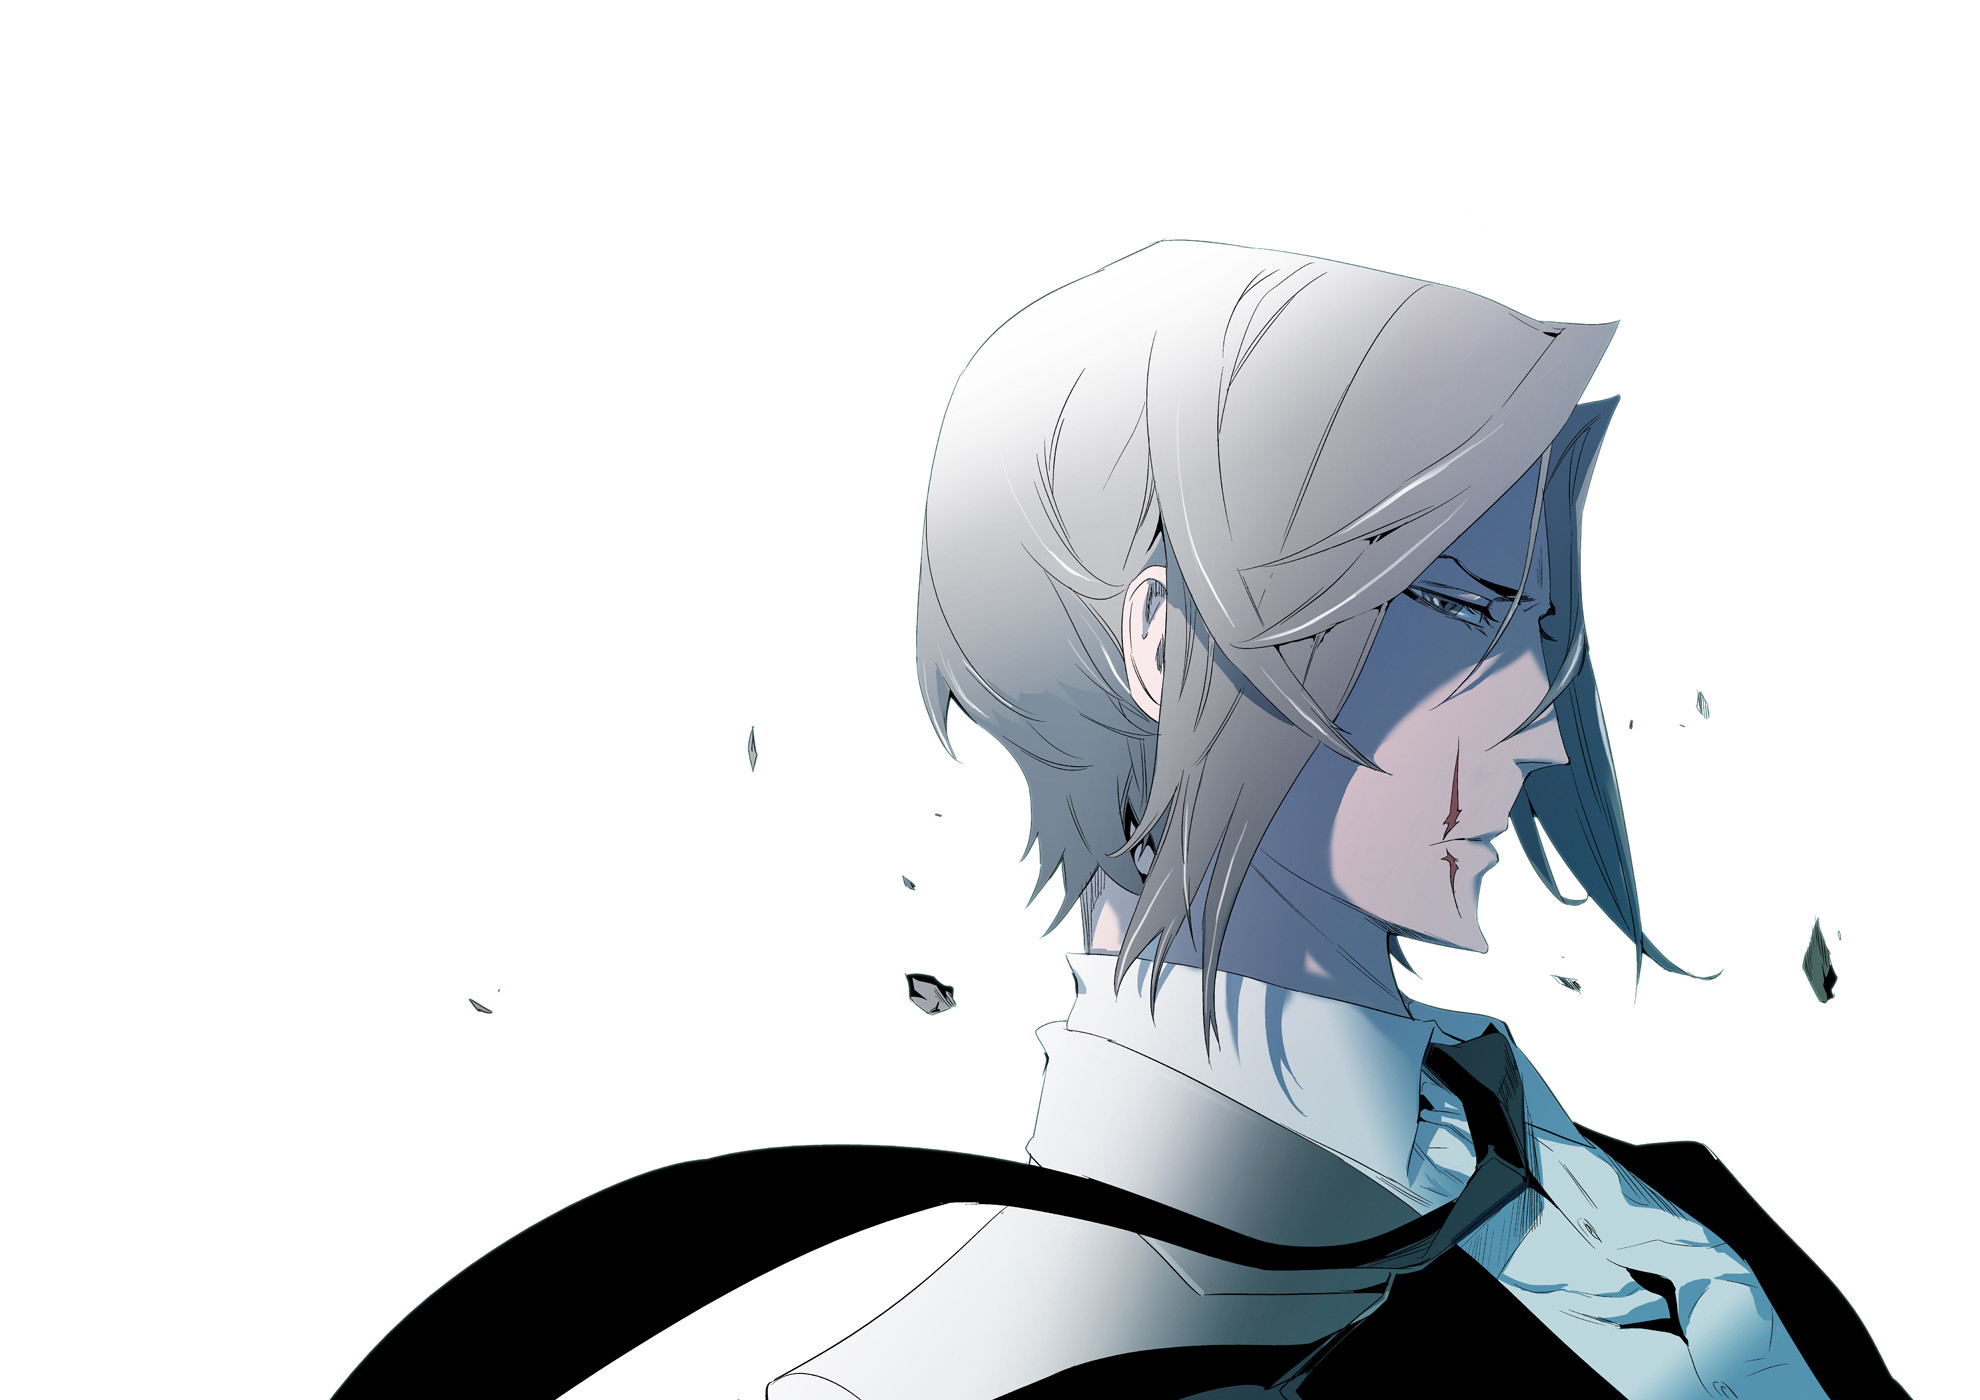 Noblesse Anime Adaptation Announced For 2020 as Crunchyroll Exclusive